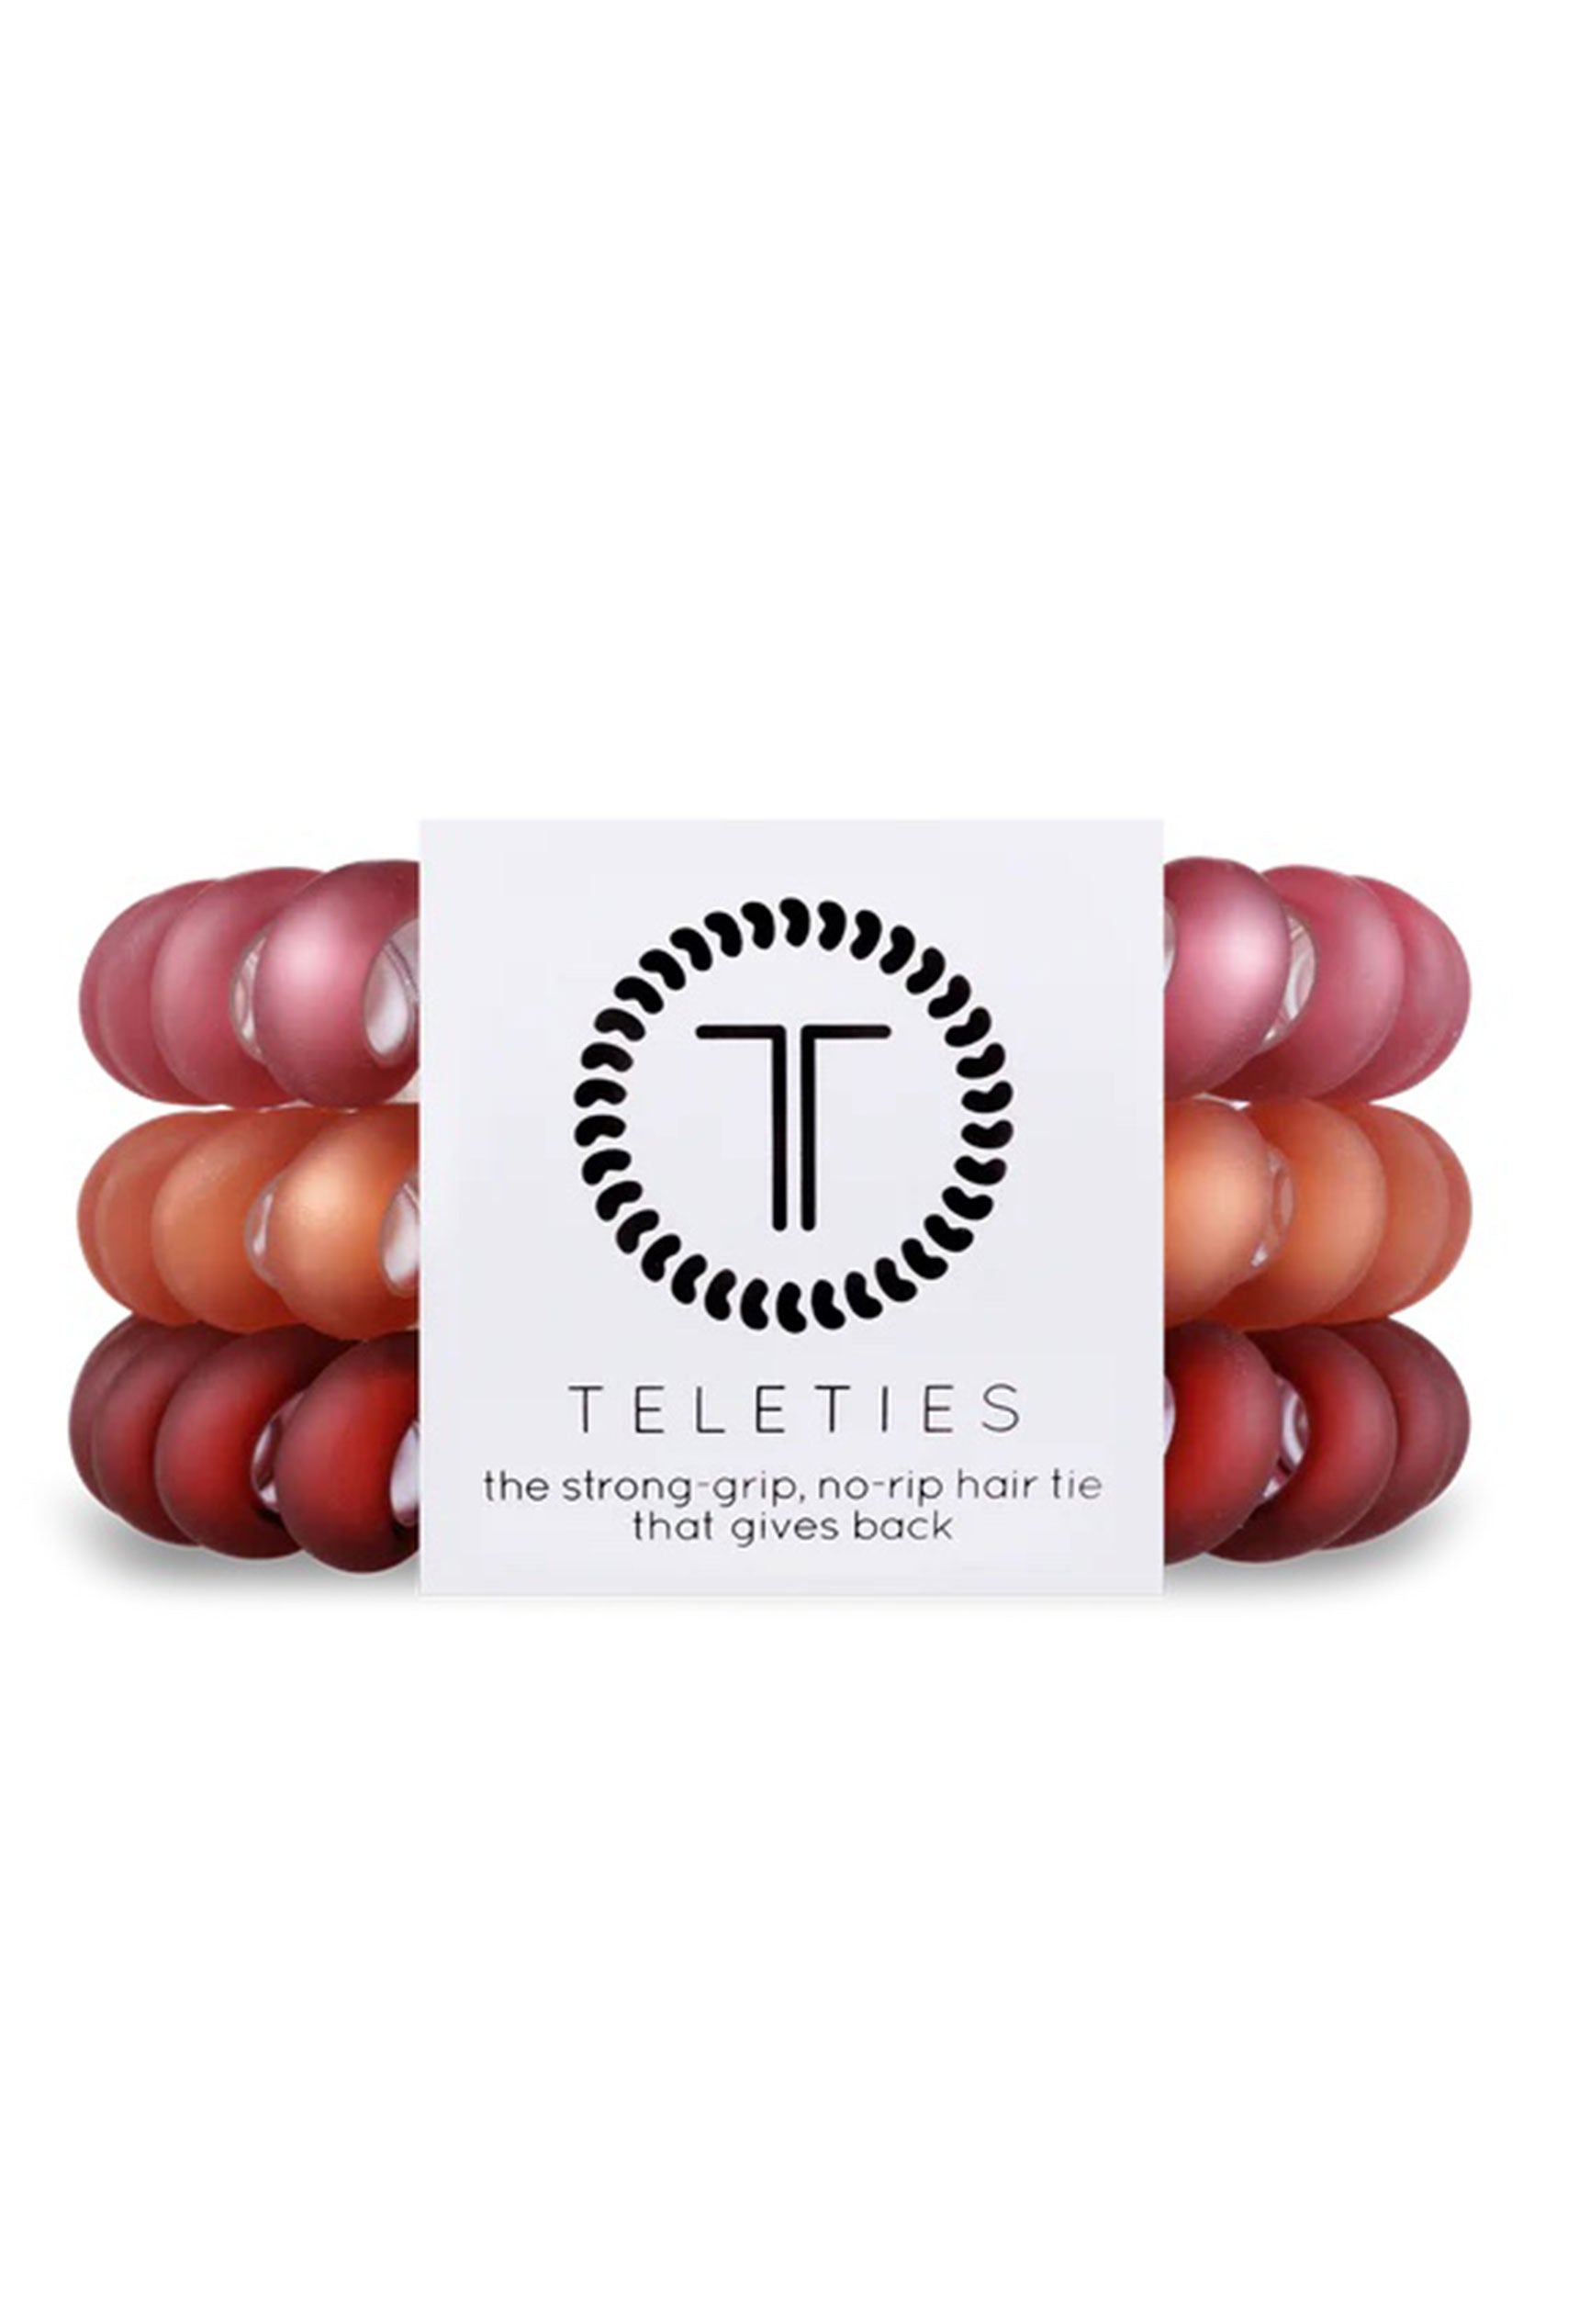 TELETIES Large Hair Ties - Spicy, set of 3, coil style hair ties, ombre from red to orange